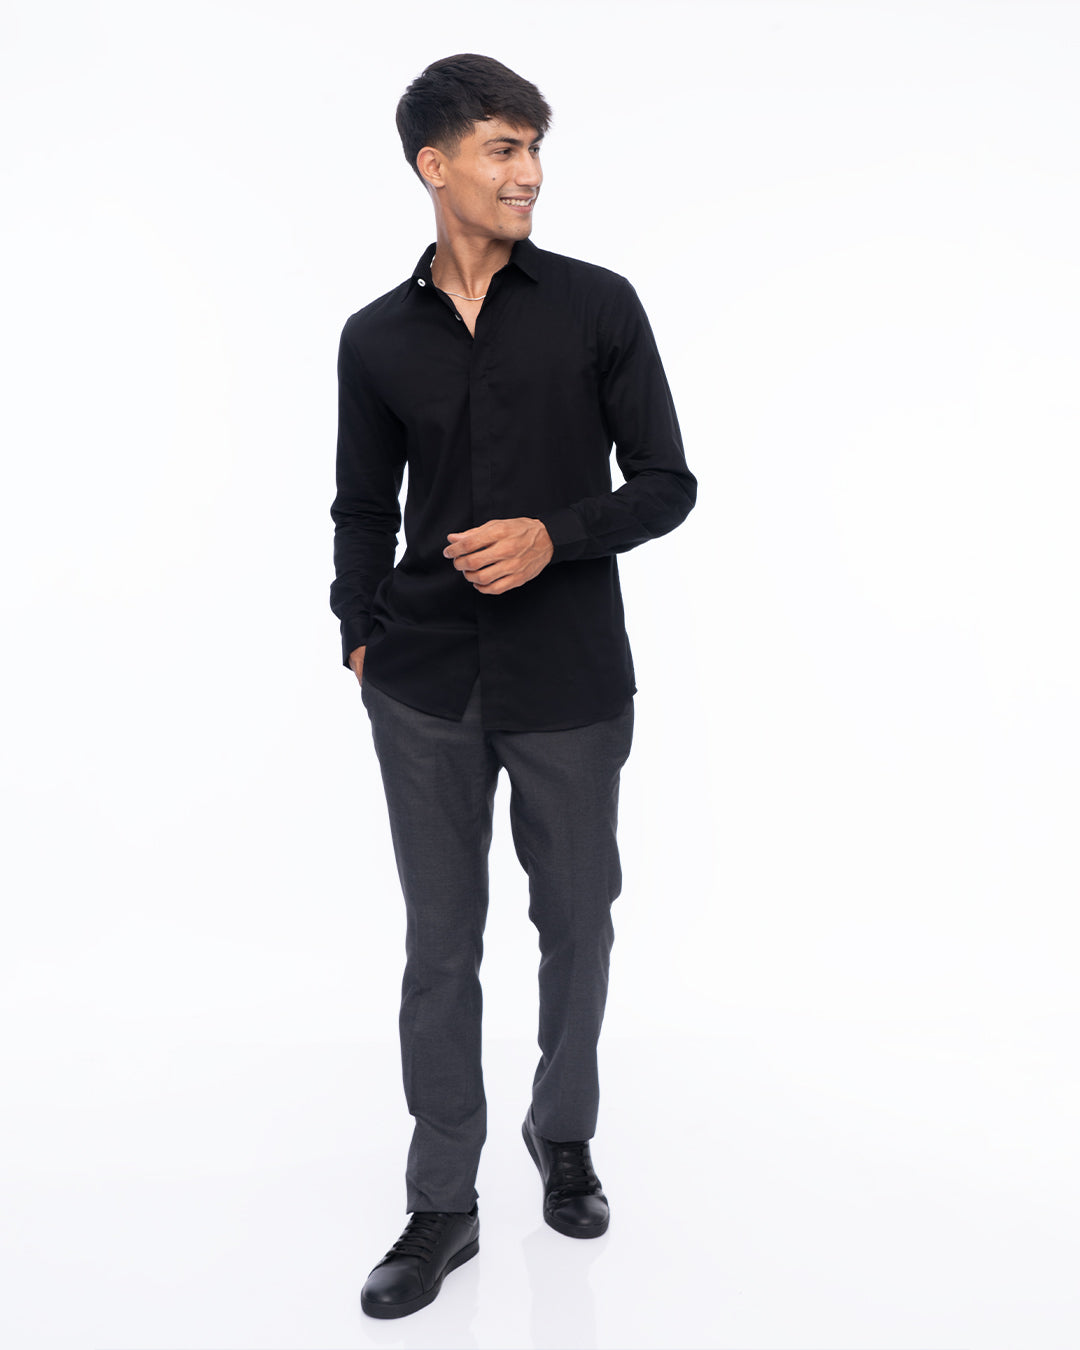 A person with short dark hair wearing an Obsidian - Classic Shirt made from premium cotton and gray pants is smiling while standing with their right hand in their pocket against a plain white background.